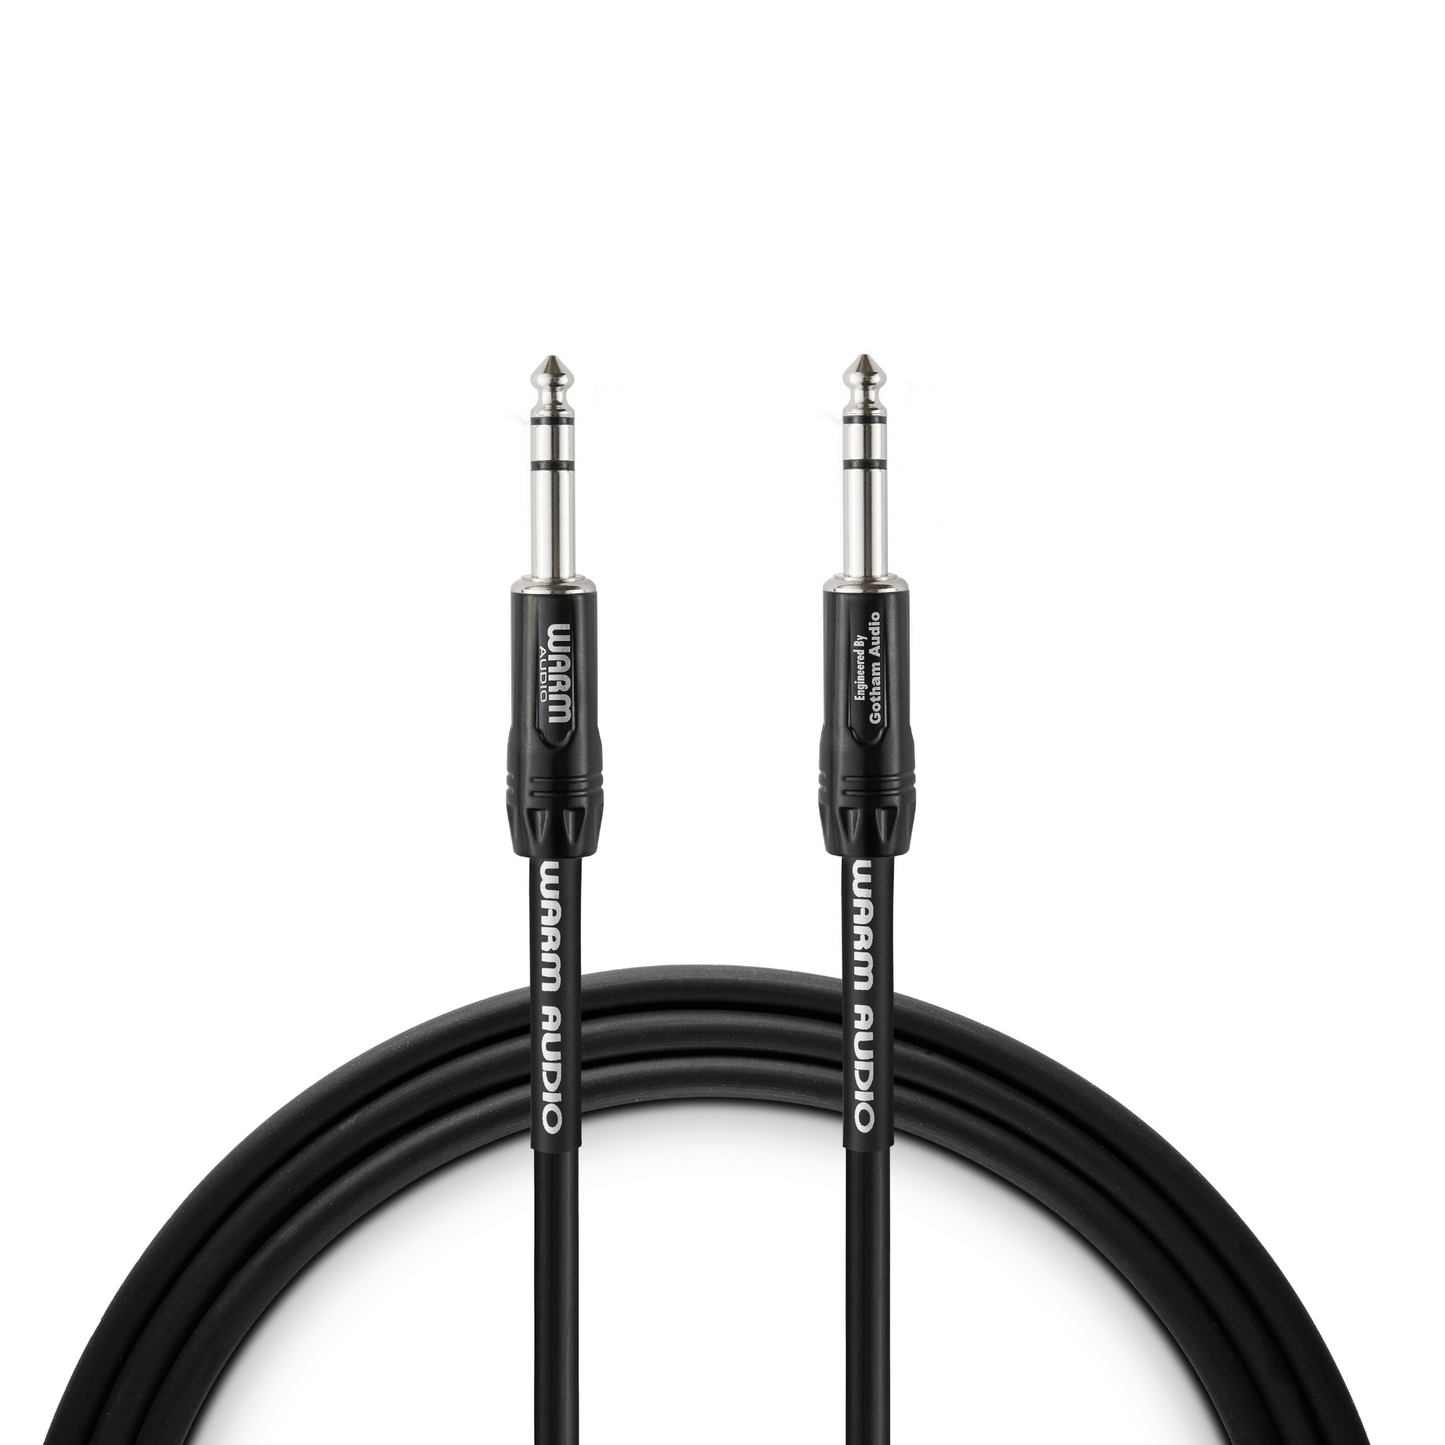 Warm Audio Pro-TRS-5' Pro Silver TRS to TRS Cable - 5-foot